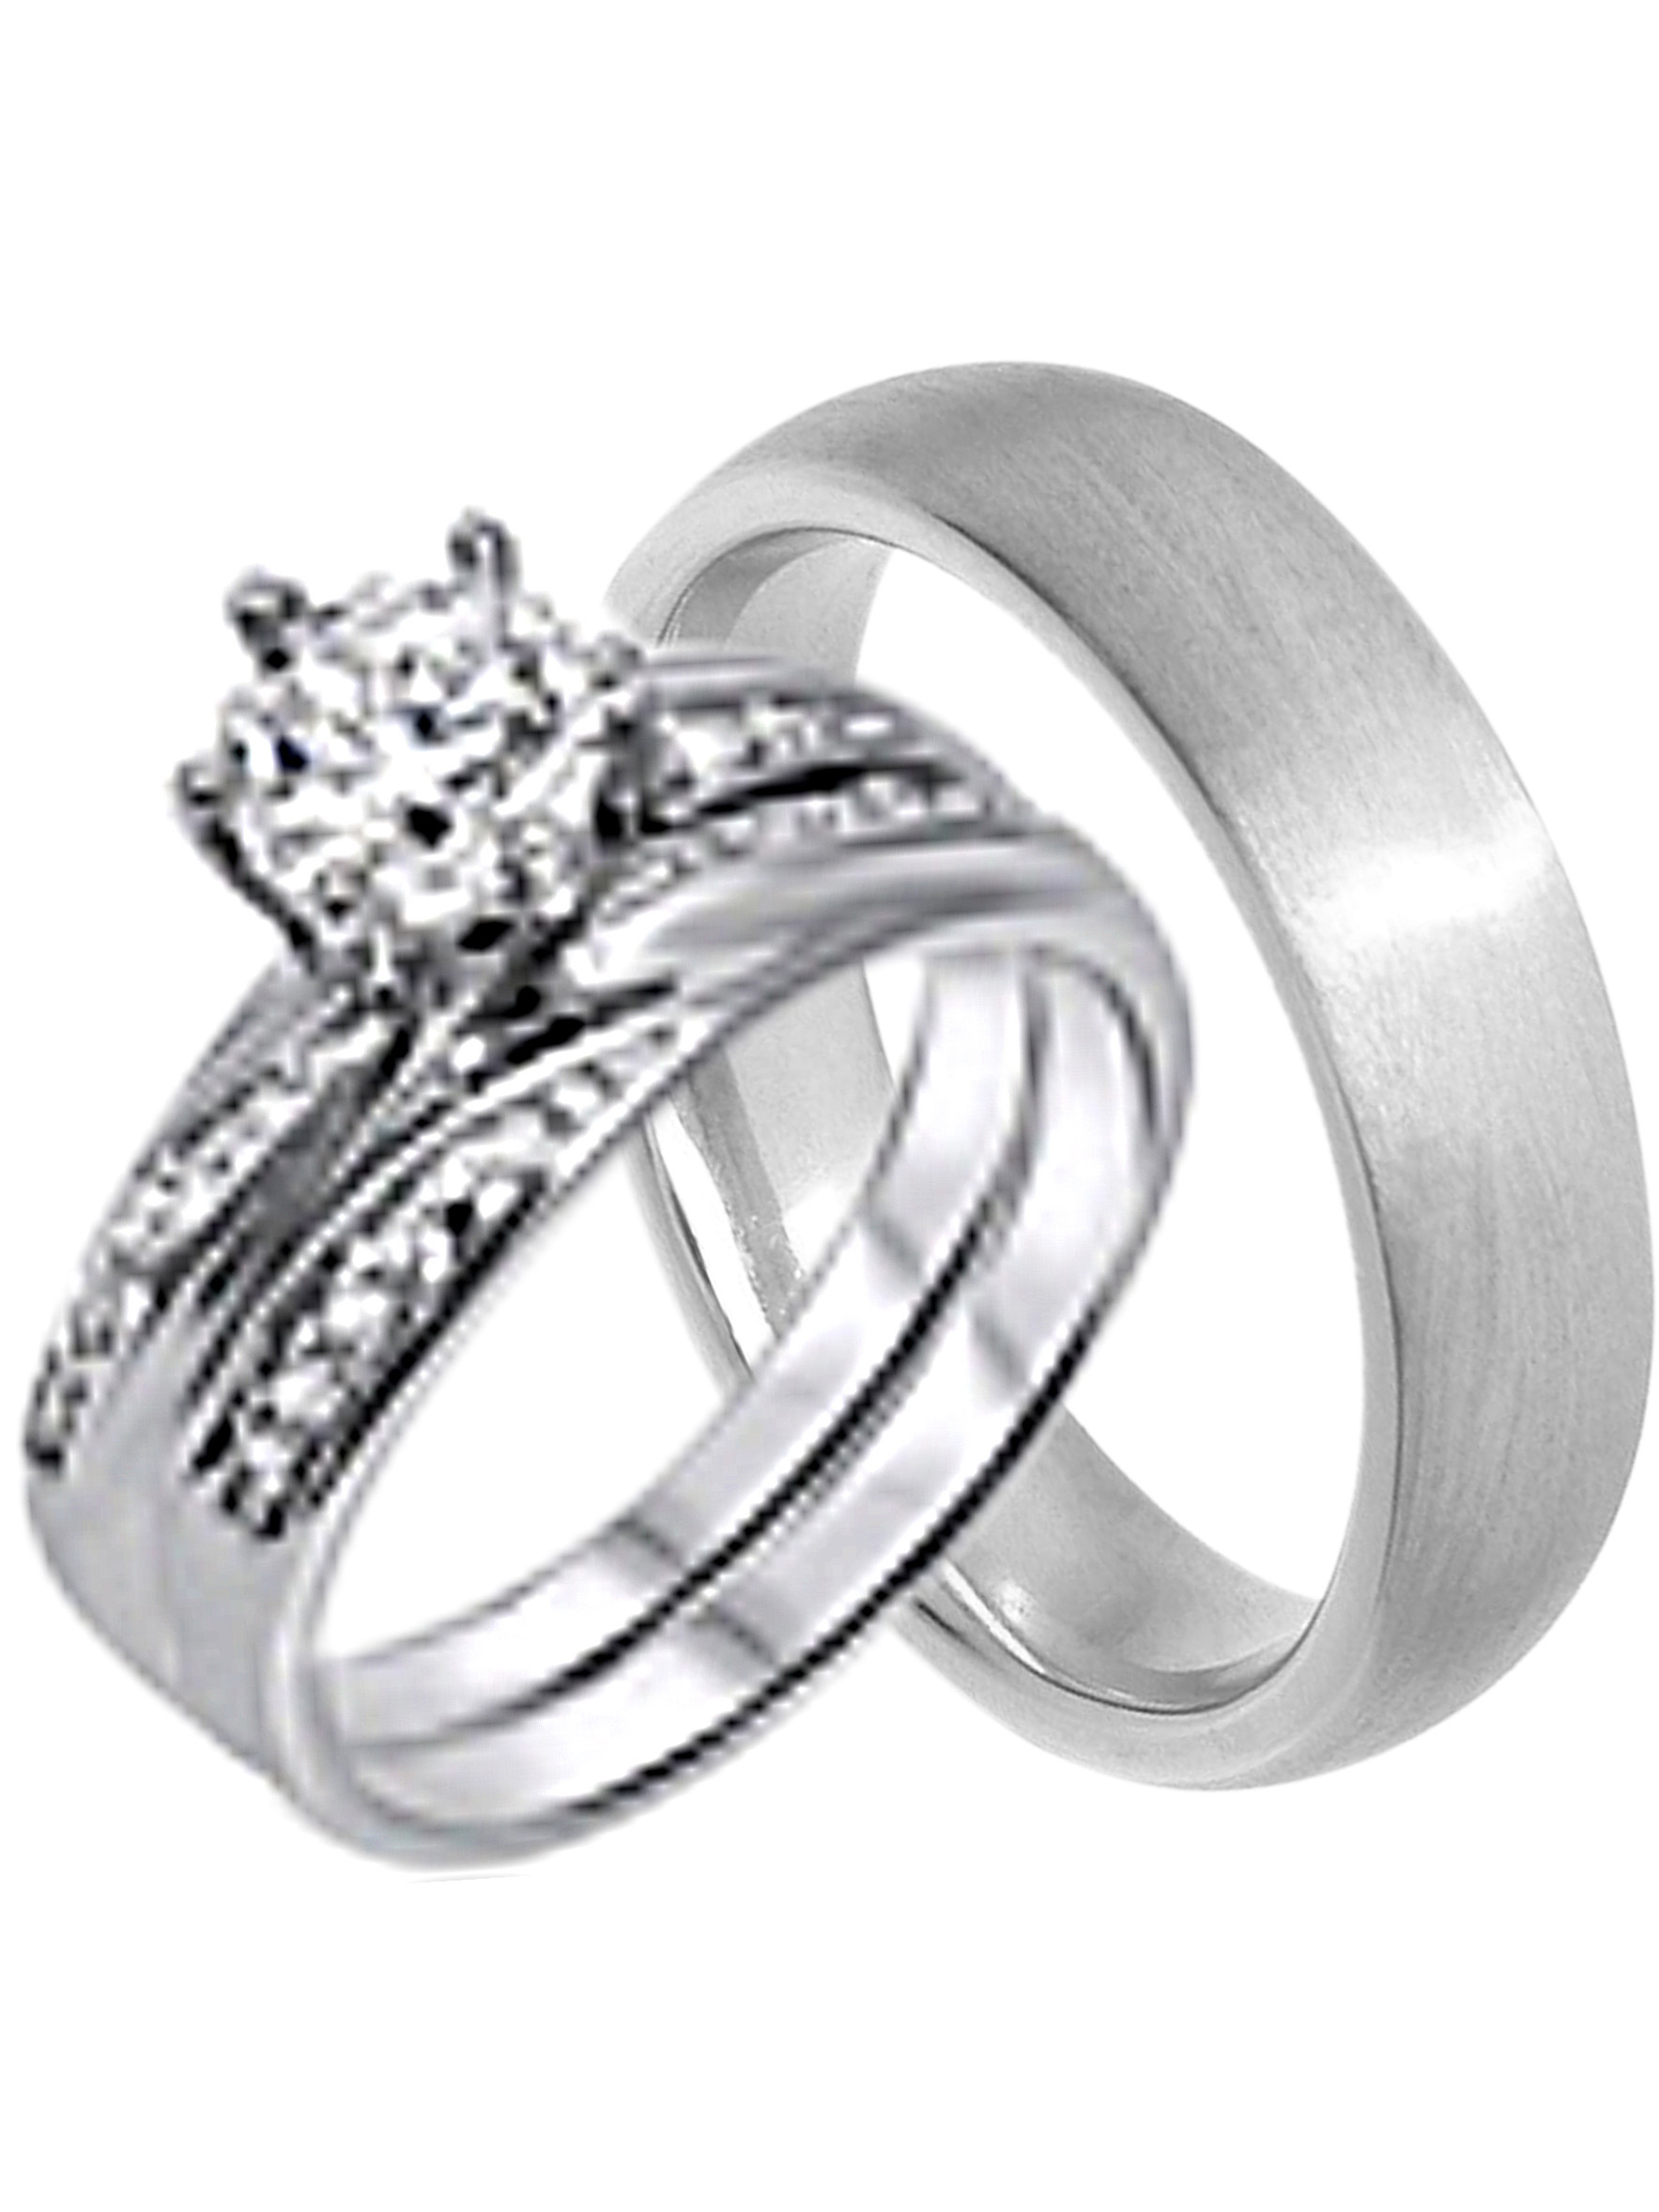 Cheap Wedding Ring Sets His And Hers
 His and Hers Wedding Ring Set Cheap Wedding Bands for Him